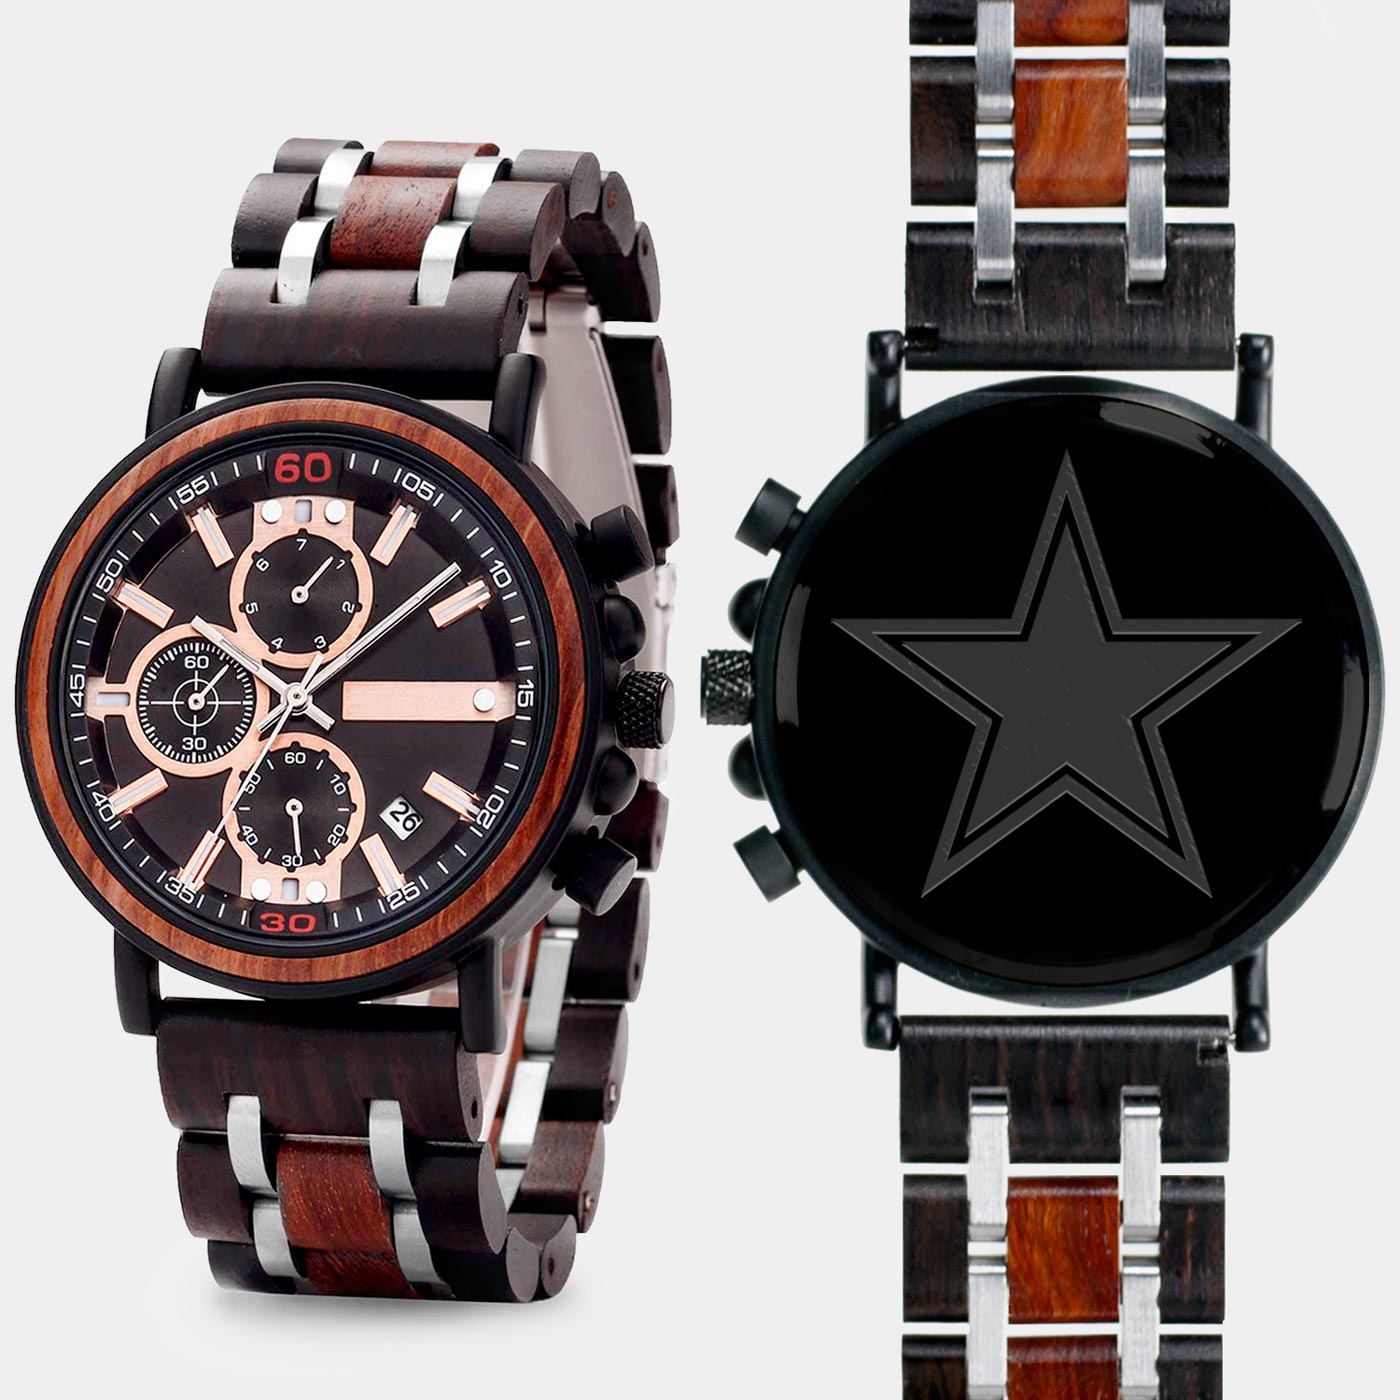 Dallas Cowboys Mens Wrist Watch  - Personalized Dallas Cowboys Mens Watches - Custom Gifts For Him, Birthday Gifts, Gift For Dad - Best 2022 Dallas Cowboys Christmas Gifts - Black 45mm NFL Wood Watch